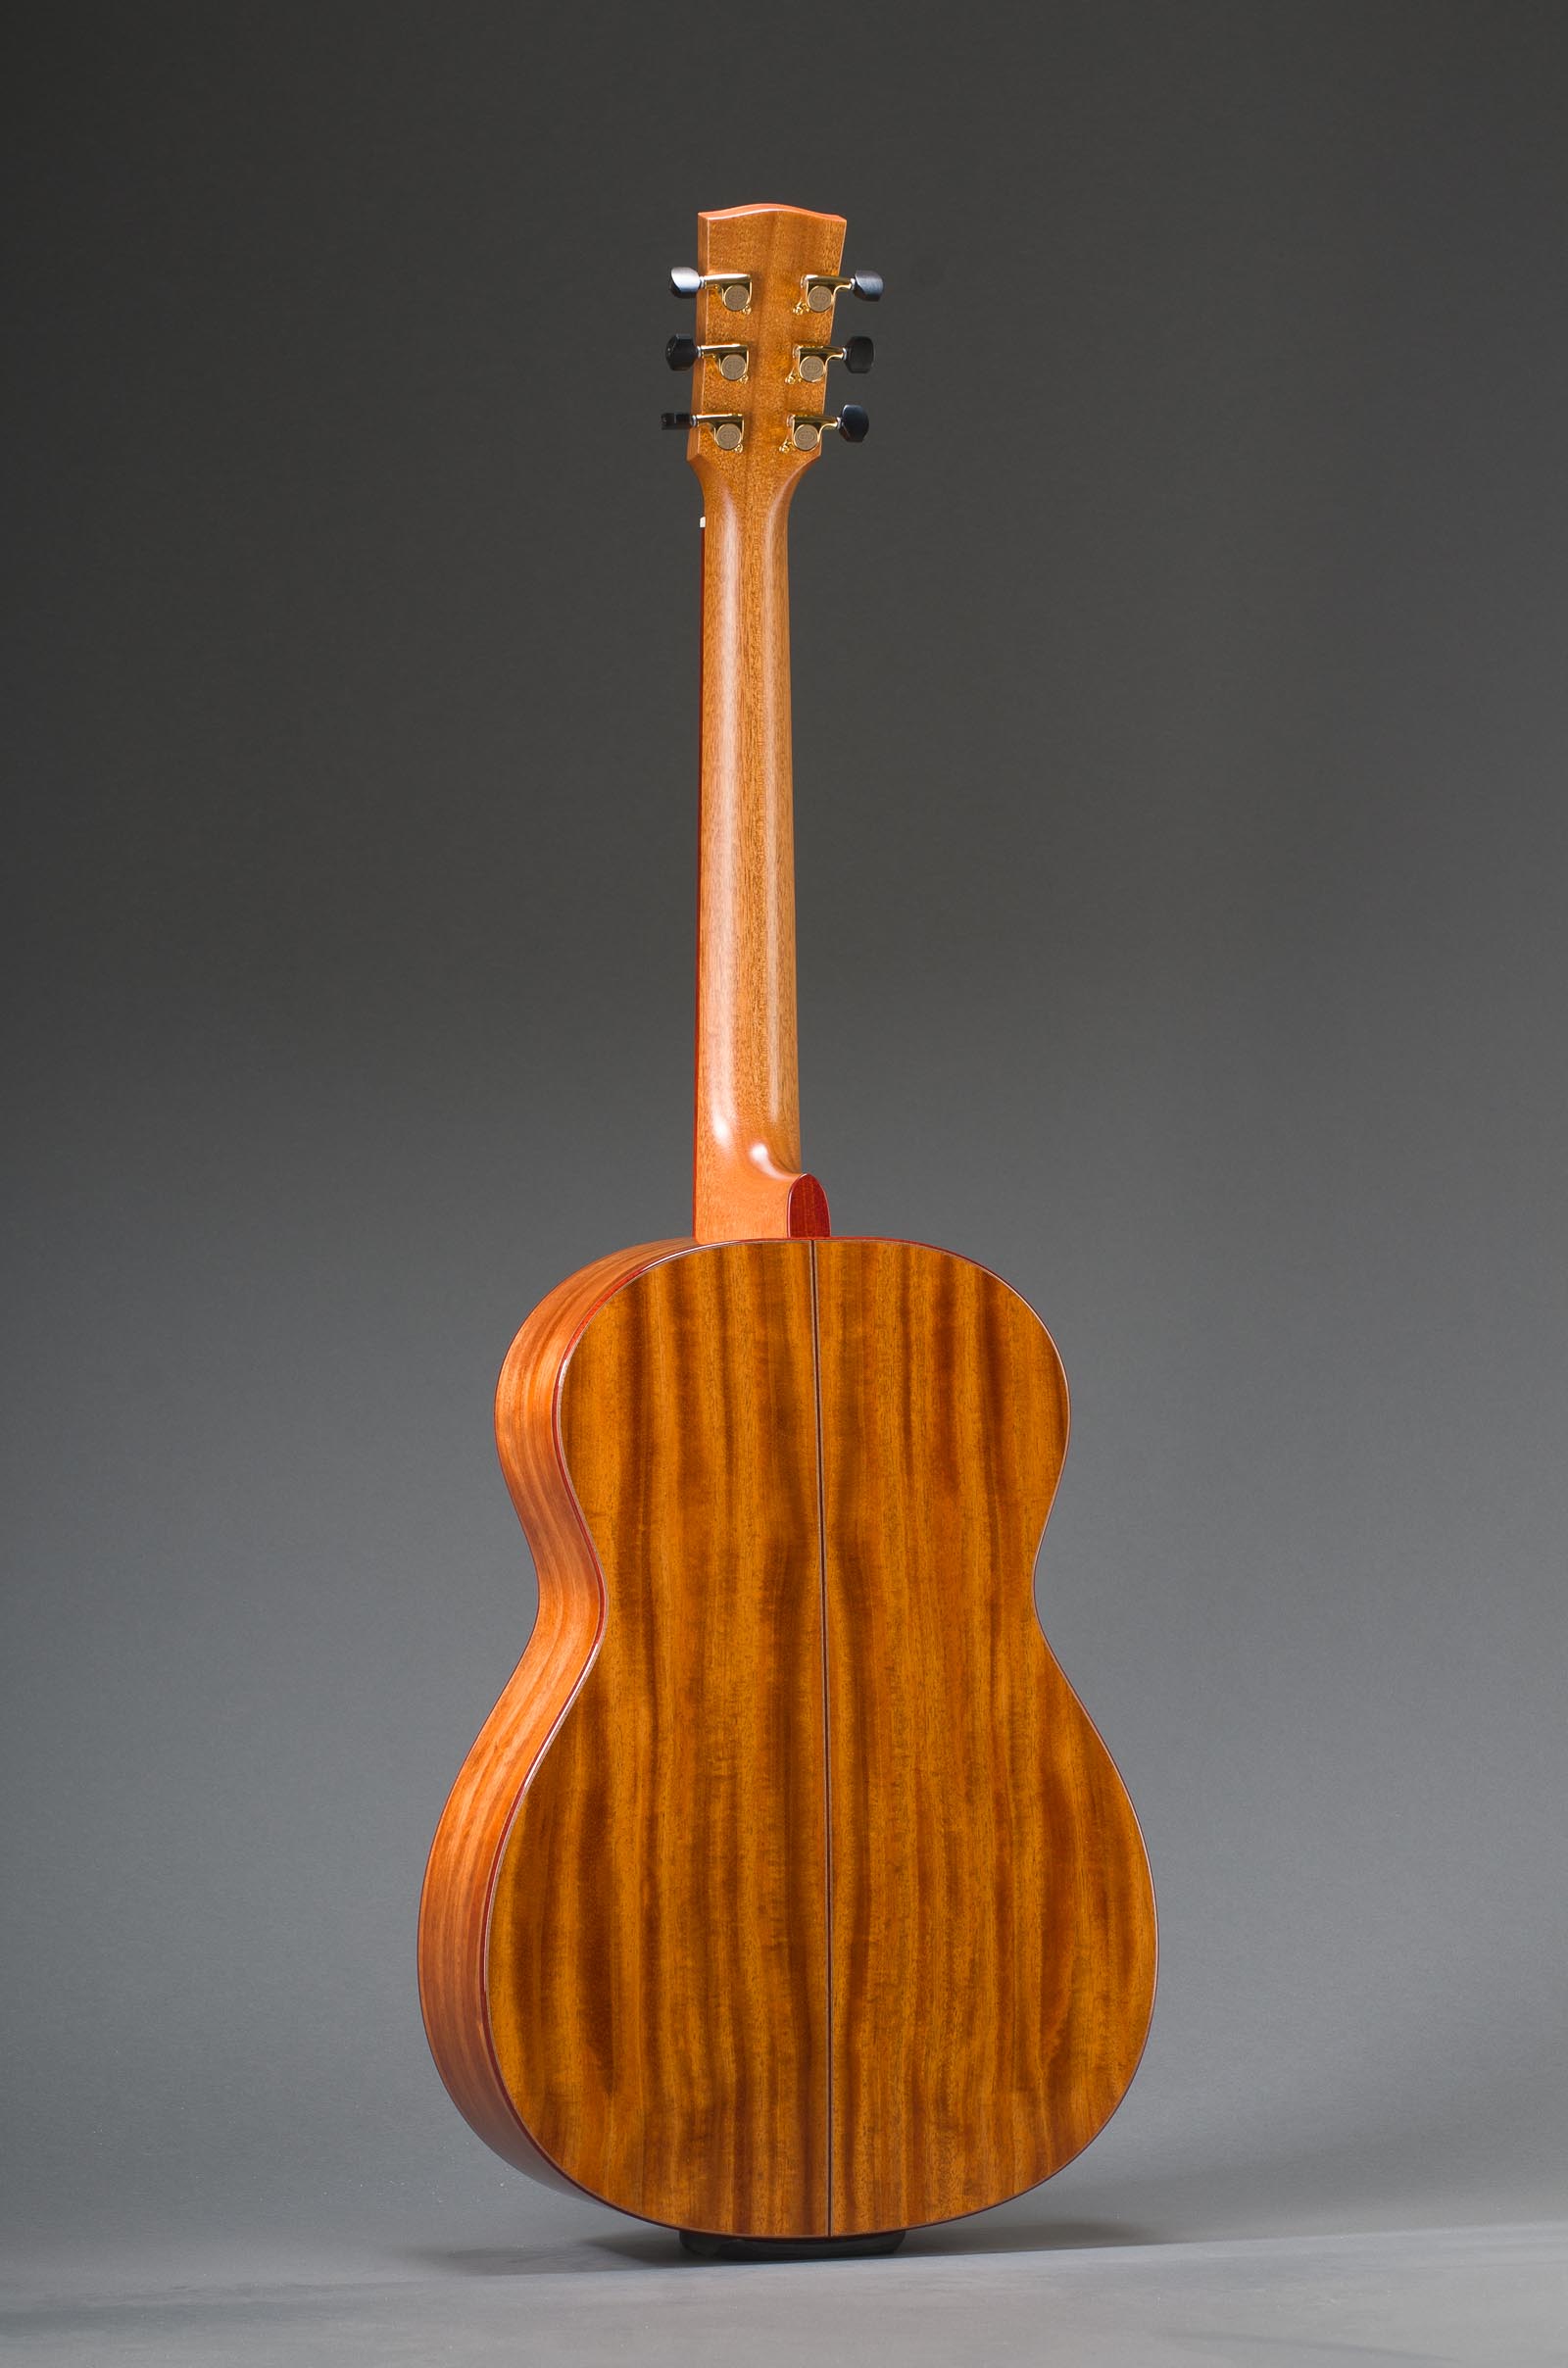 14-Fret Parlor - All Ribbon Mahogany Including Top, Fancy Abalone Rosette, & Bloodwood Binding - Including Matching Fretboard Option, Fancy Abalone Rosette